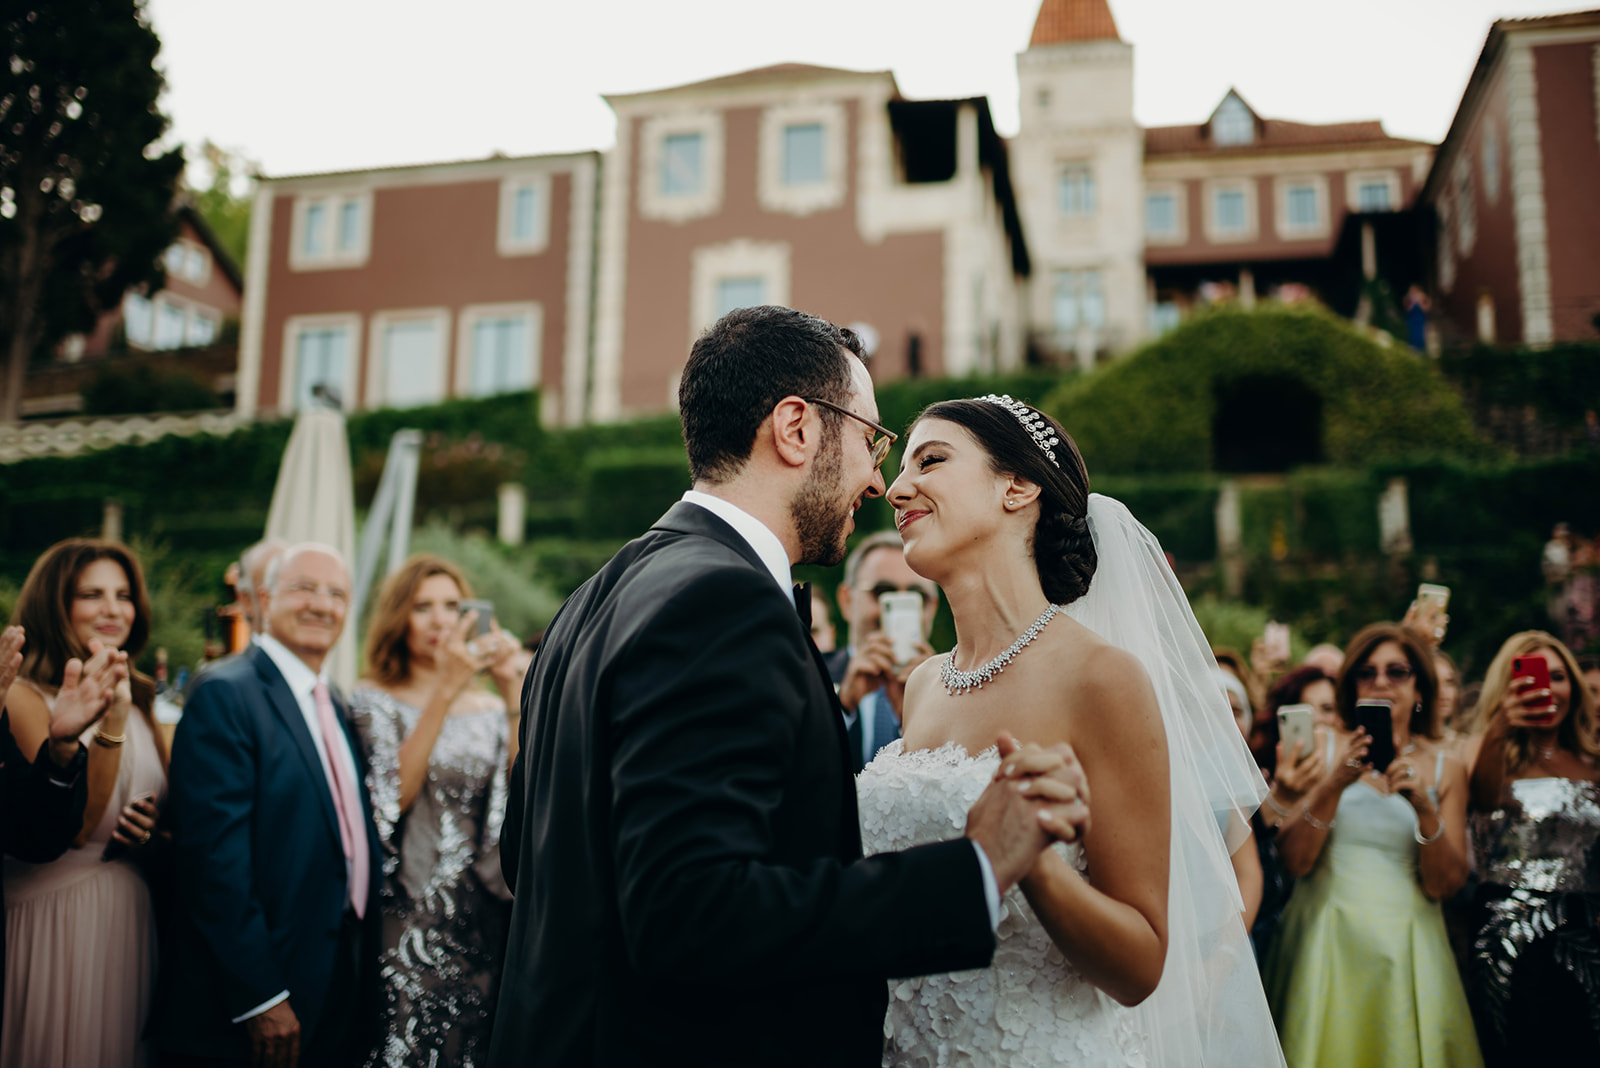 First dance between bride and groom at Arab destination wedding in Portugal